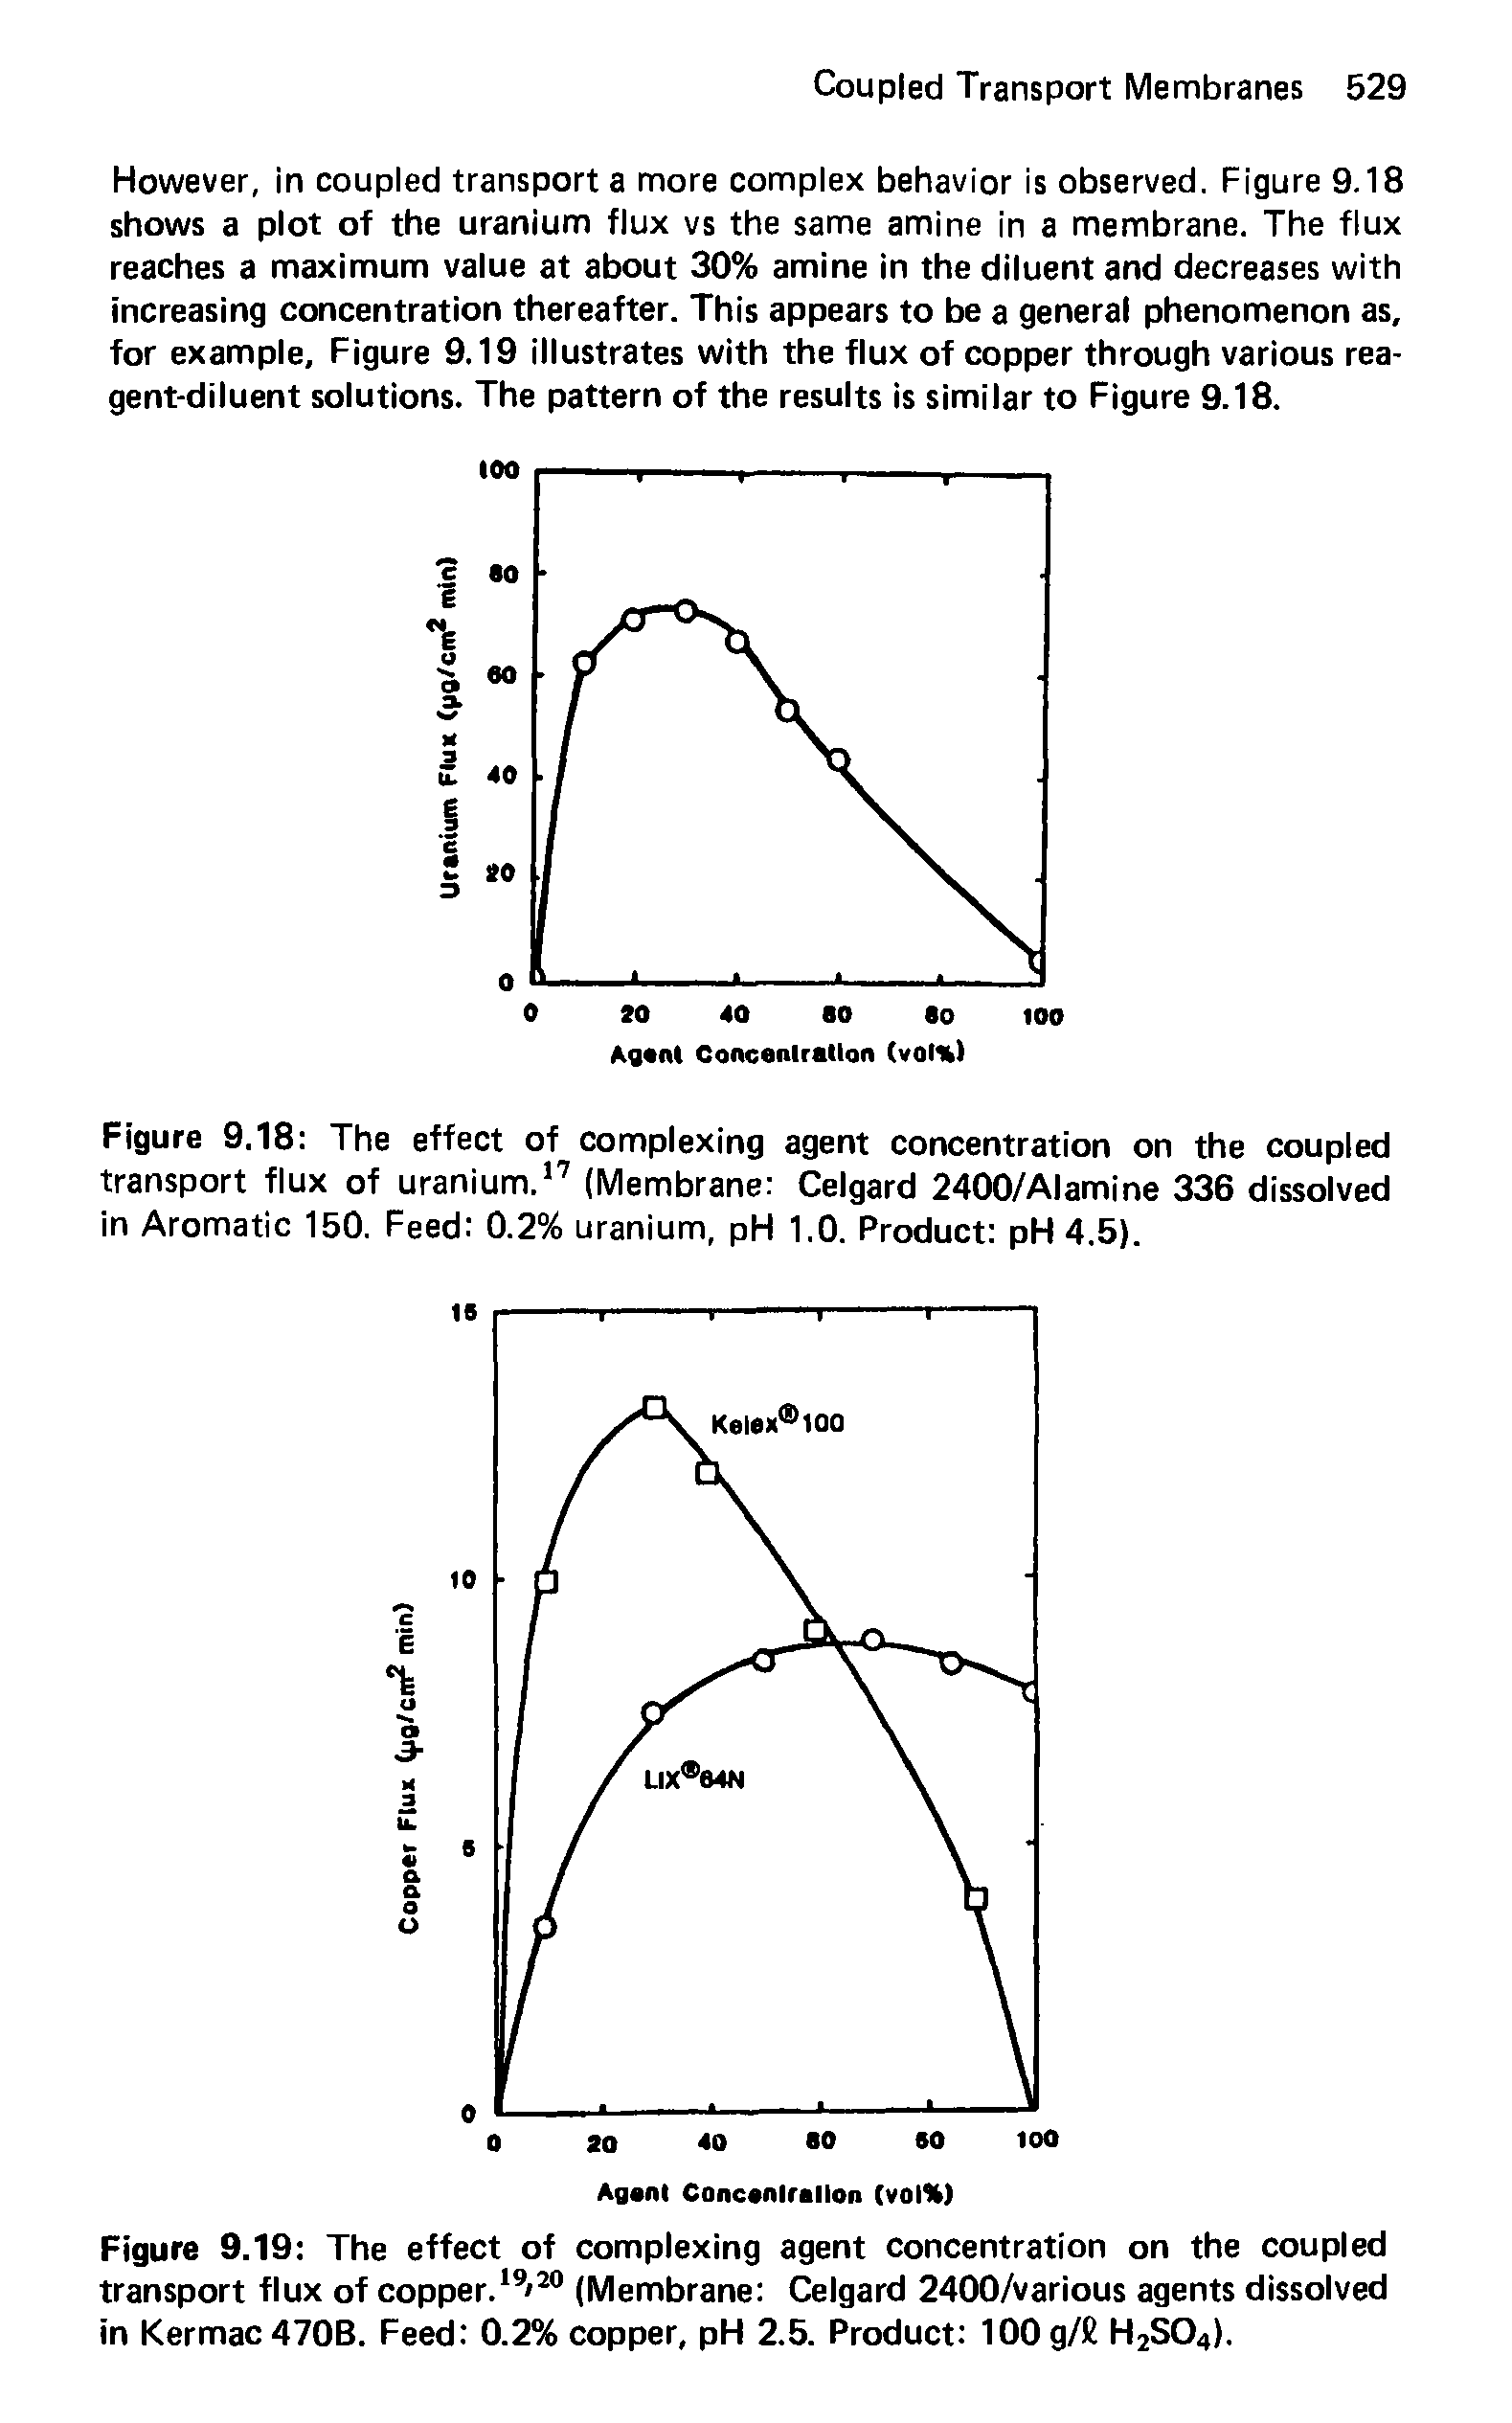 Figure 9.18 The effect of complexing agent concentration on the coupled transport flux of uranium.17 (Membrane Celgard 2400/Alamine 336 dissolved in Aromatic 150. Feed 0.2% uranium, pH 1.0. Product pH 4.5).